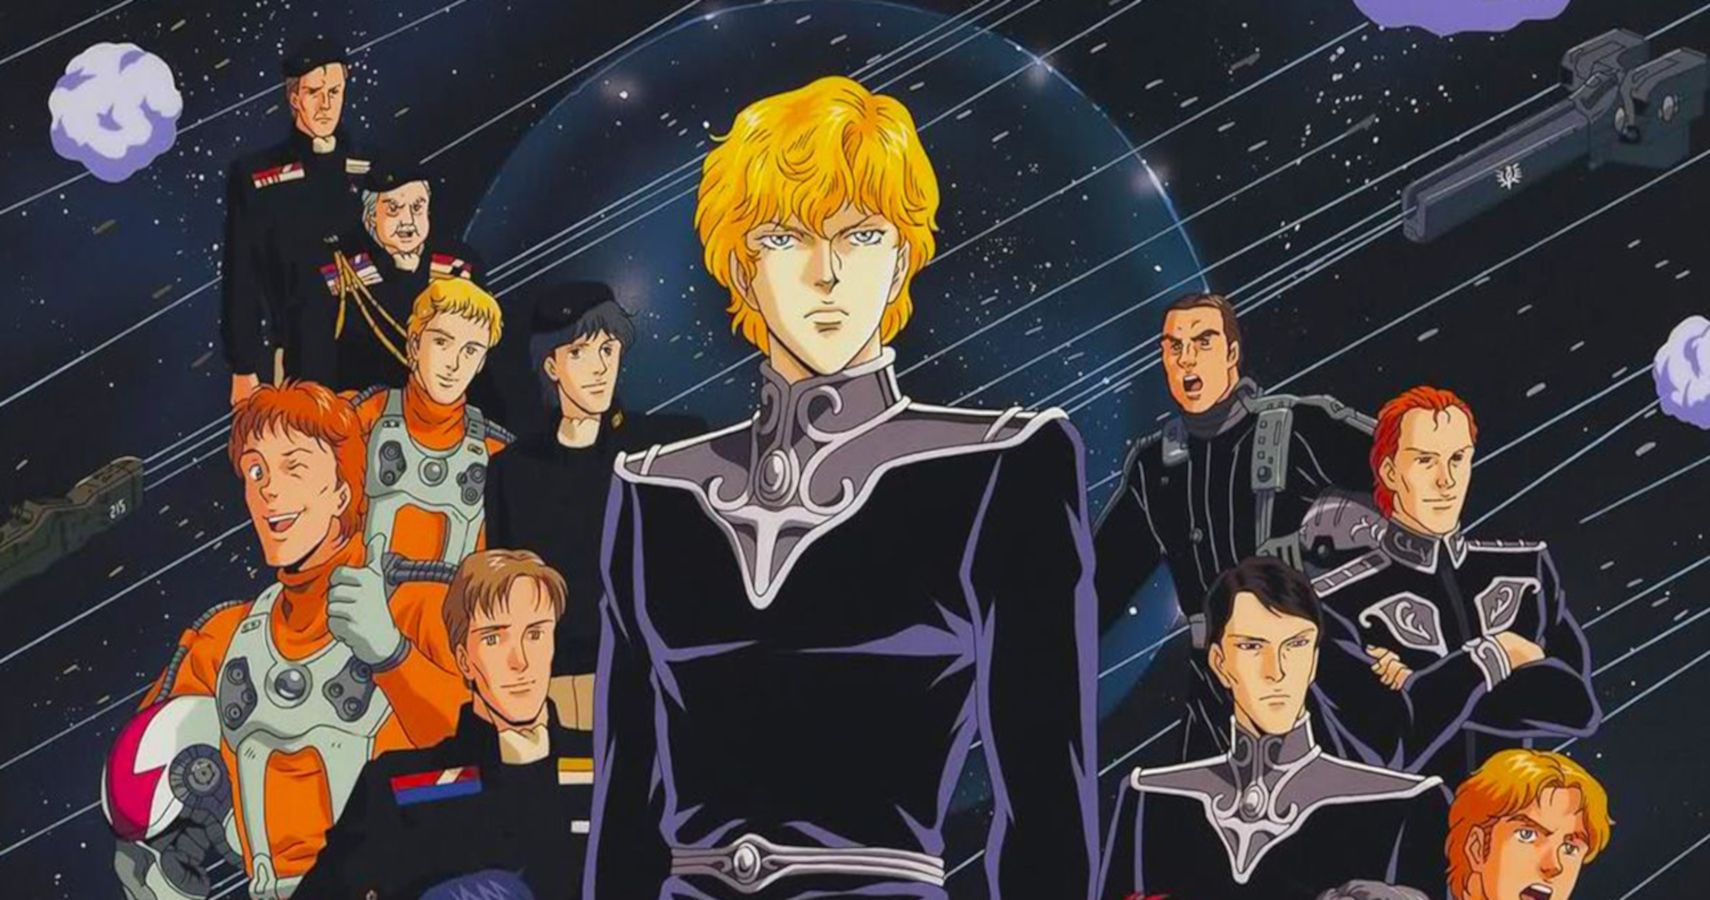 Legend of the Galactic Heroes: Die Neue Saga is announced as an adaptation  of the famous anime